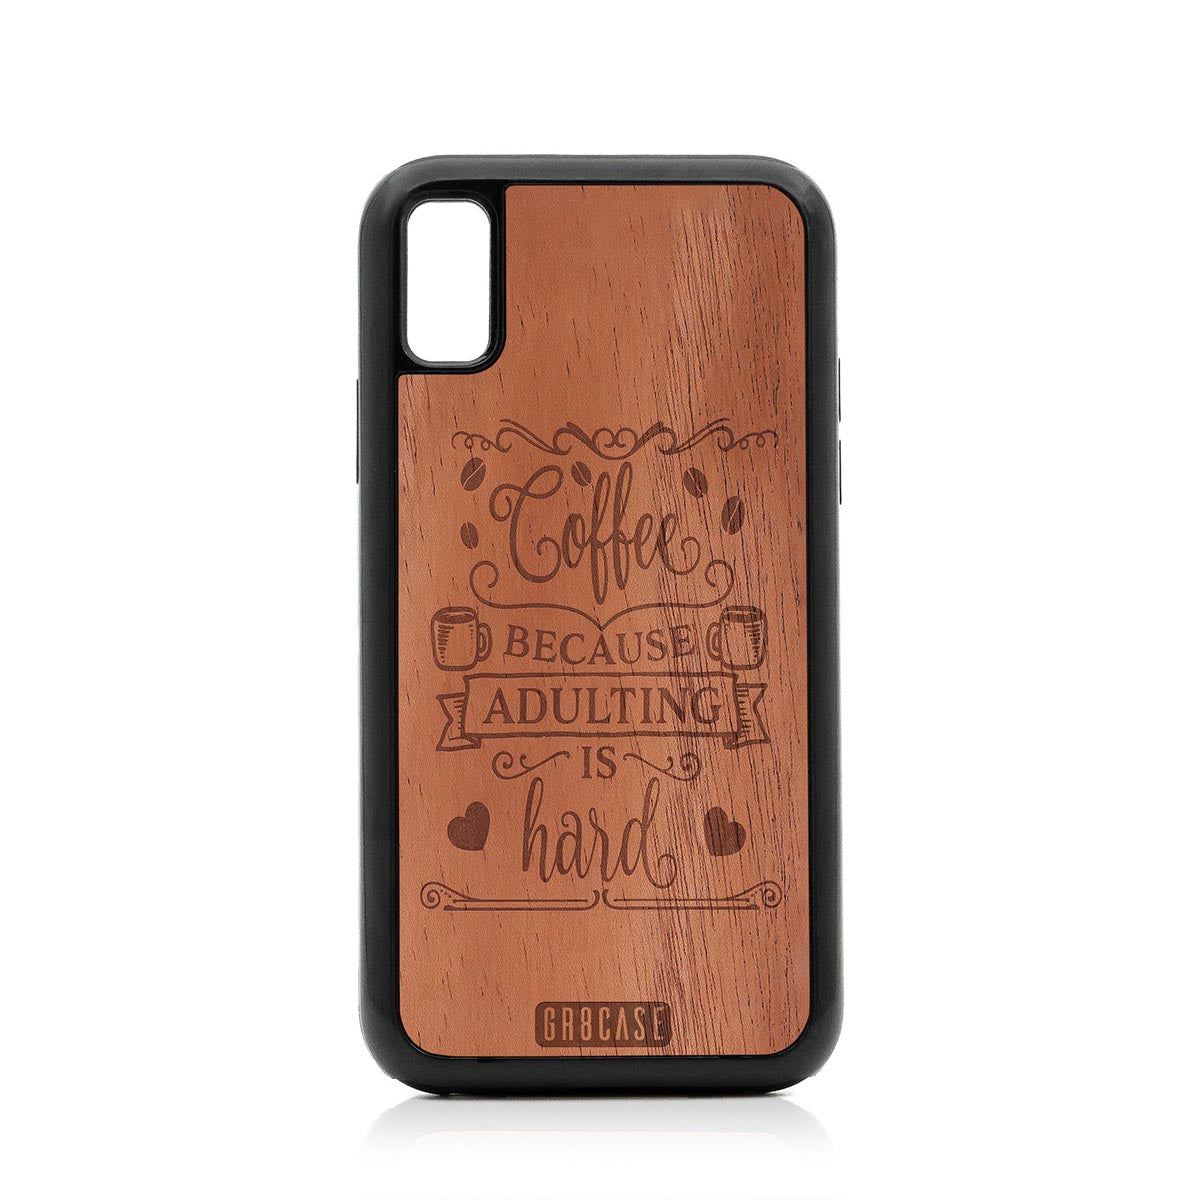 Coffee Because Adulting Is Hard Design Wood Case For iPhone XR by GR8CASE